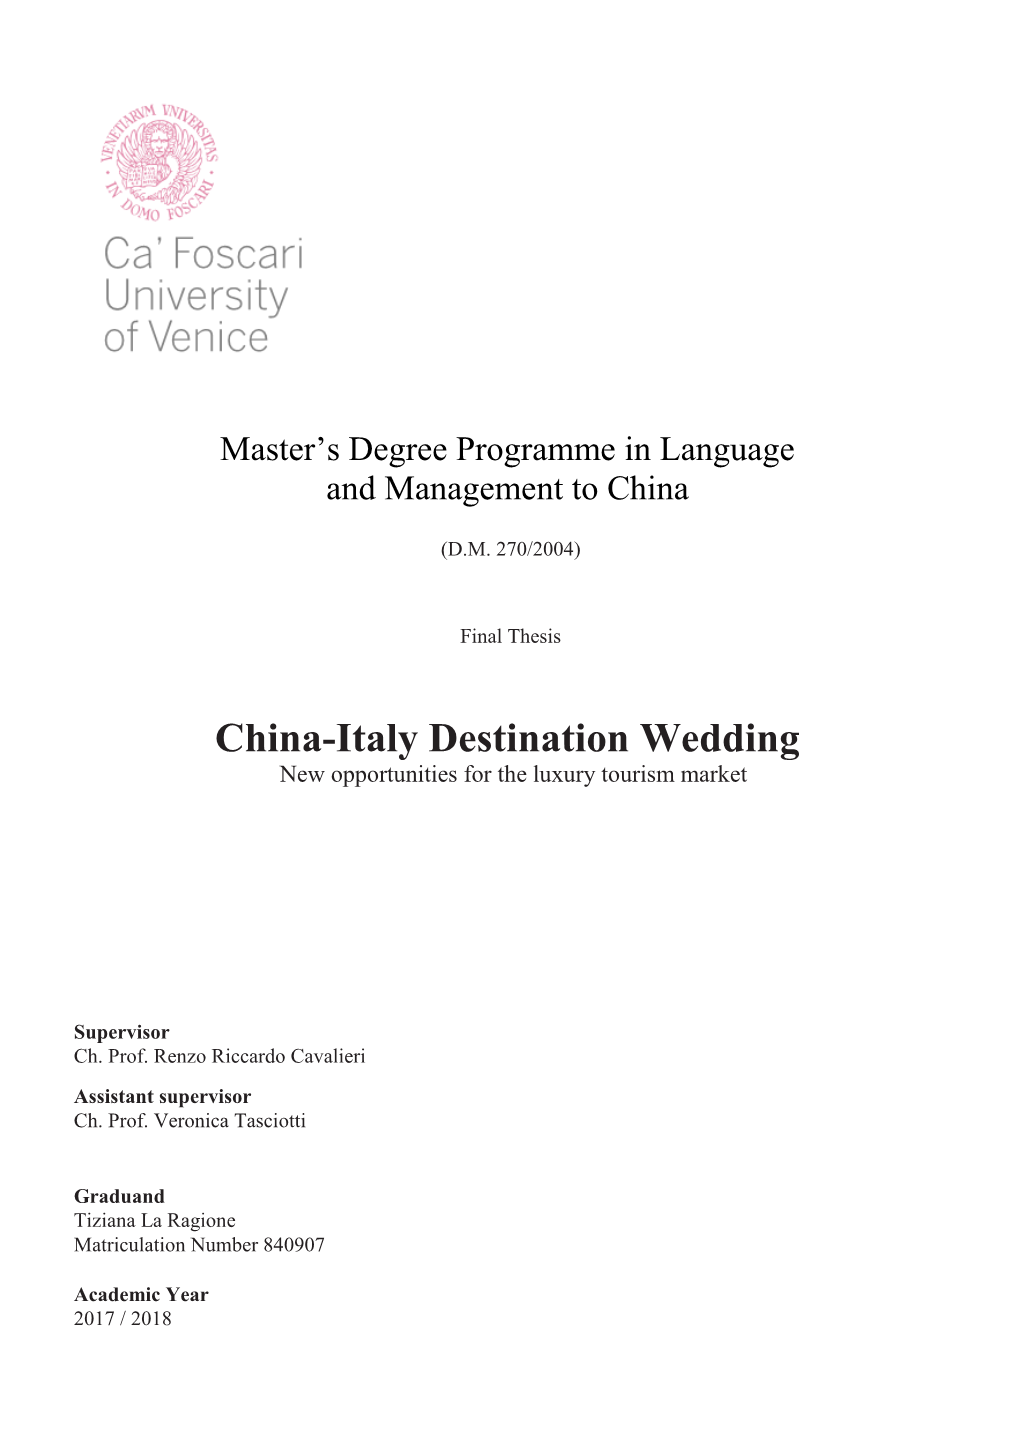 China-Italy Destination Wedding New Opportunities for the Luxury Tourism Market